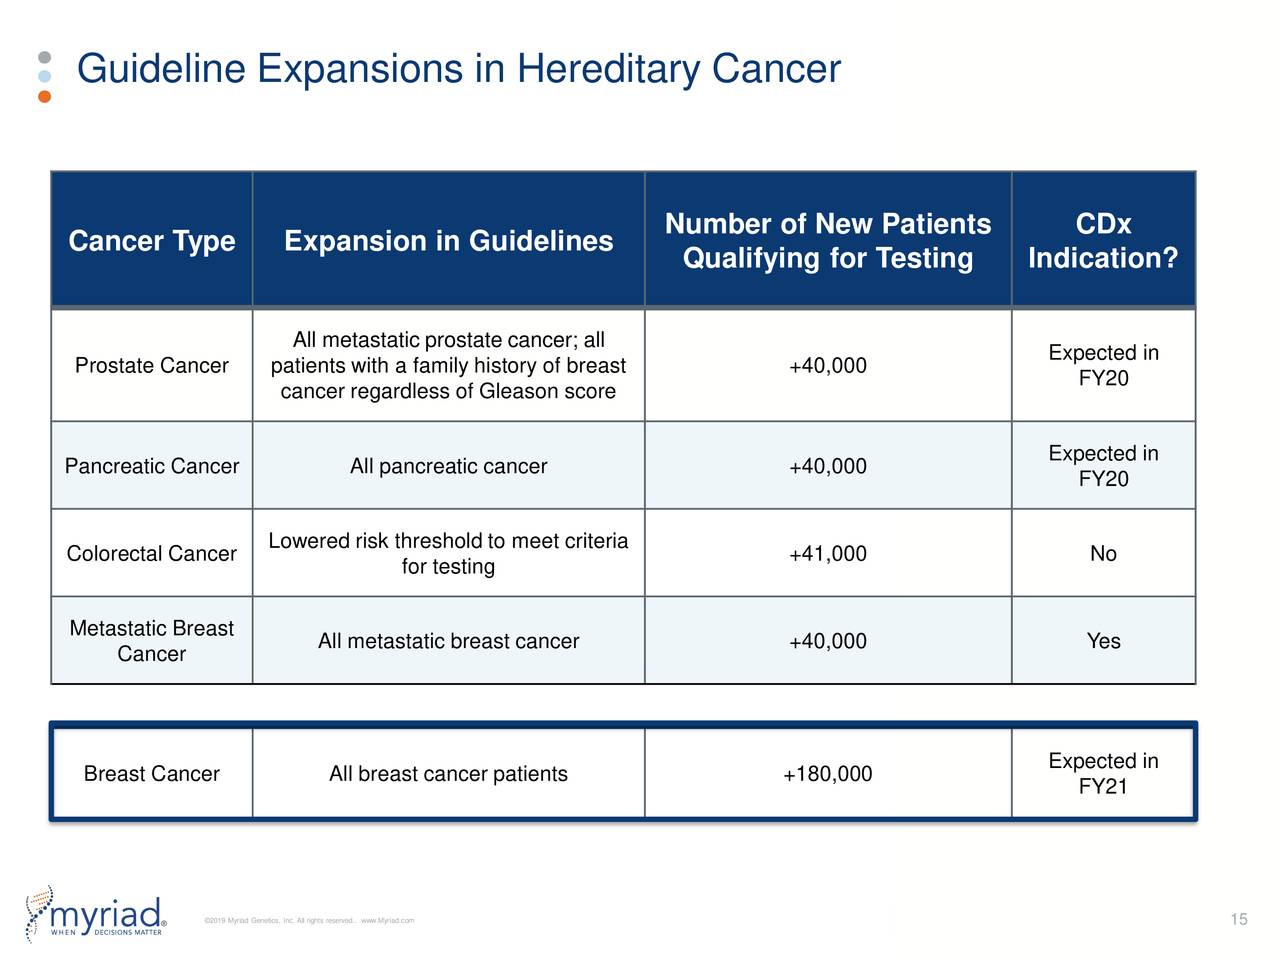 Guideline Expansions in Hereditary Cancer